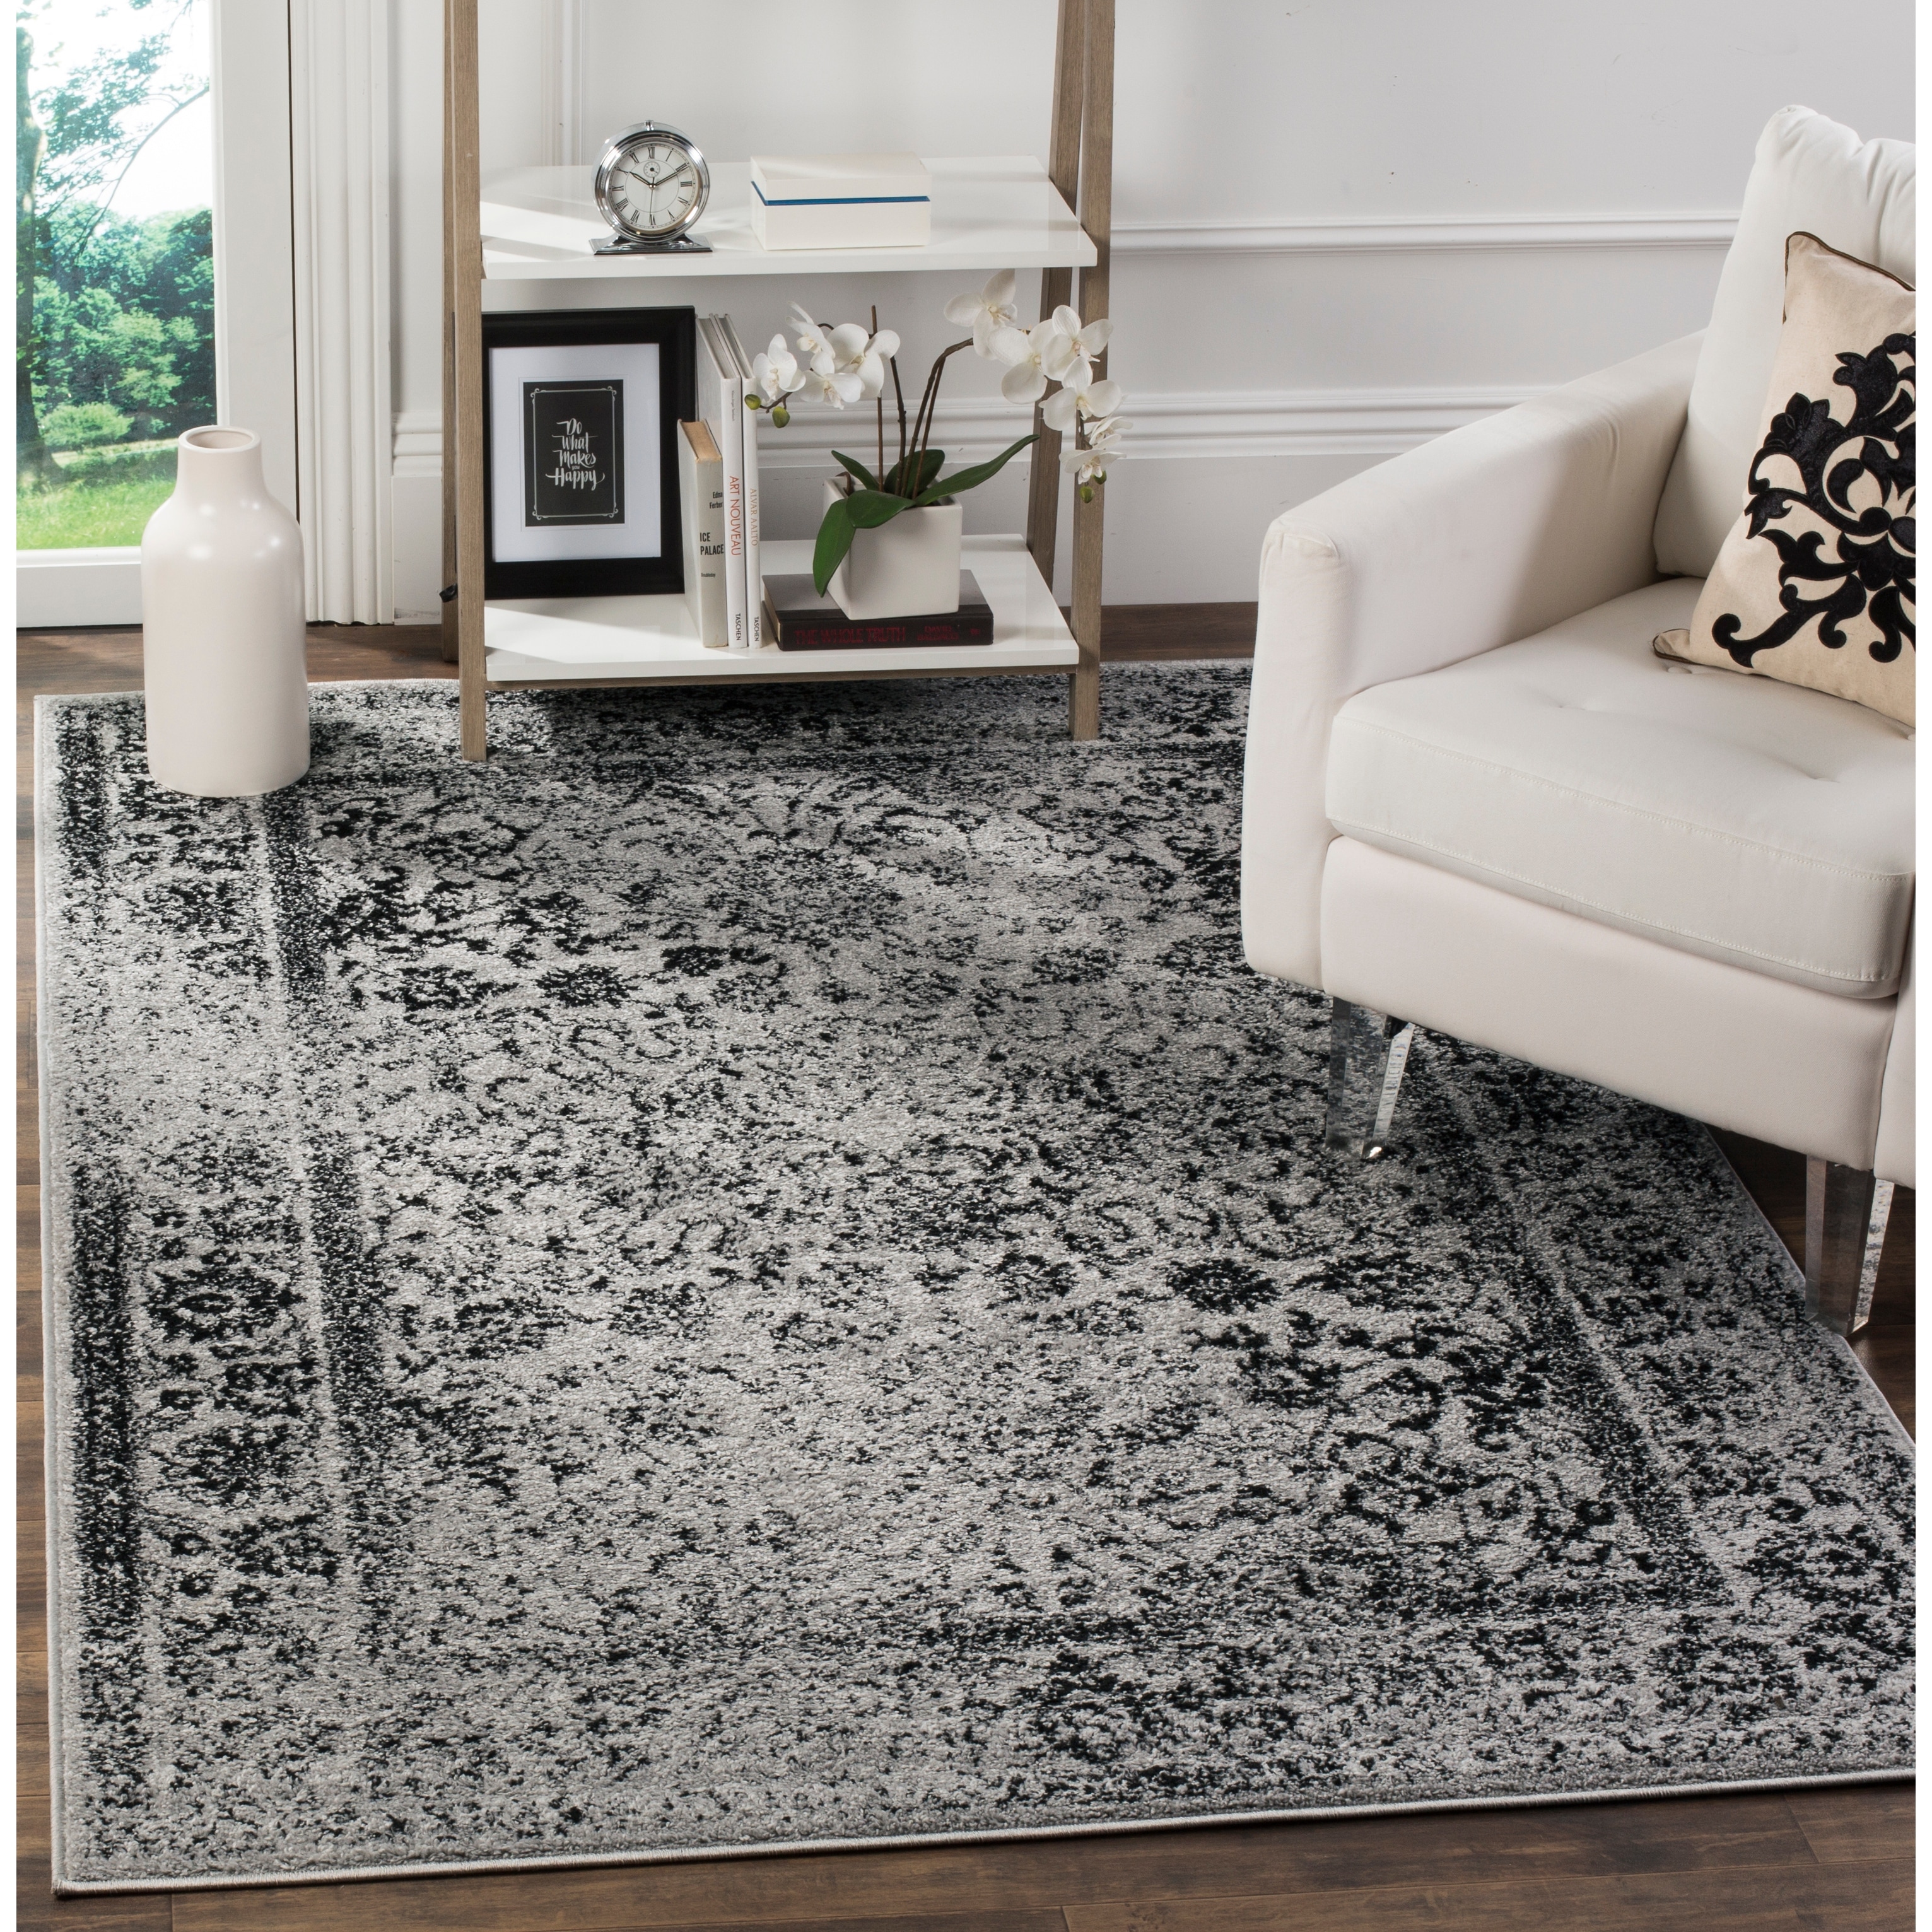 Grey Oriental Rug Small Extra Large Shabby Chic New Carpet Lounge Room Floor Mat 